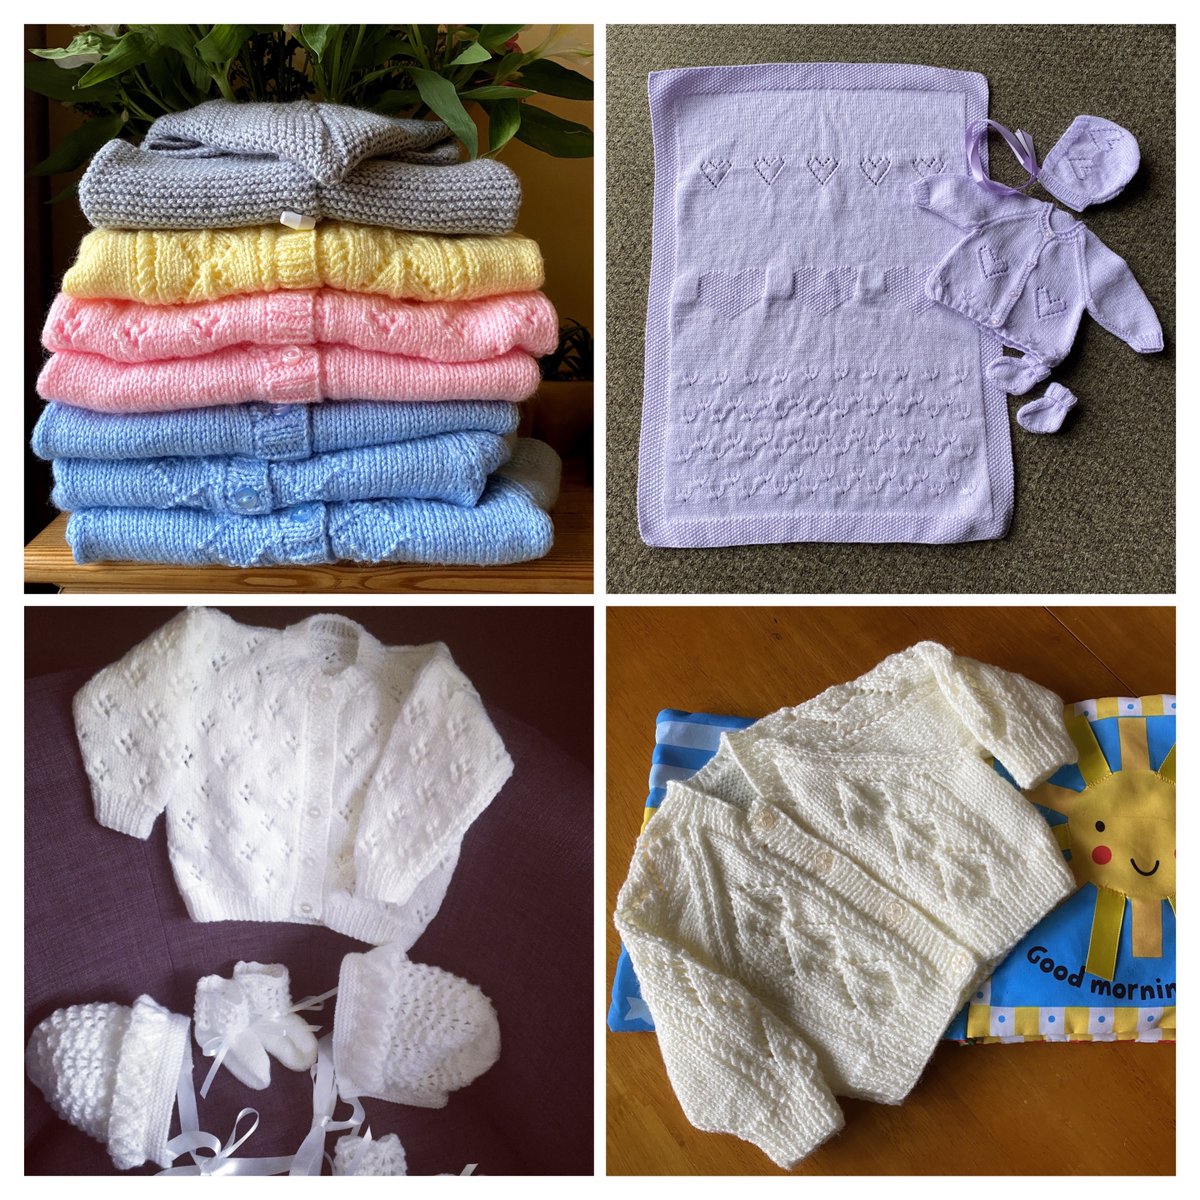 A selection of #handmade #baby #gifts available at crwd.fr/2Ei9cIa Special requests most welcome. #handknit #etsy #MHHSBD